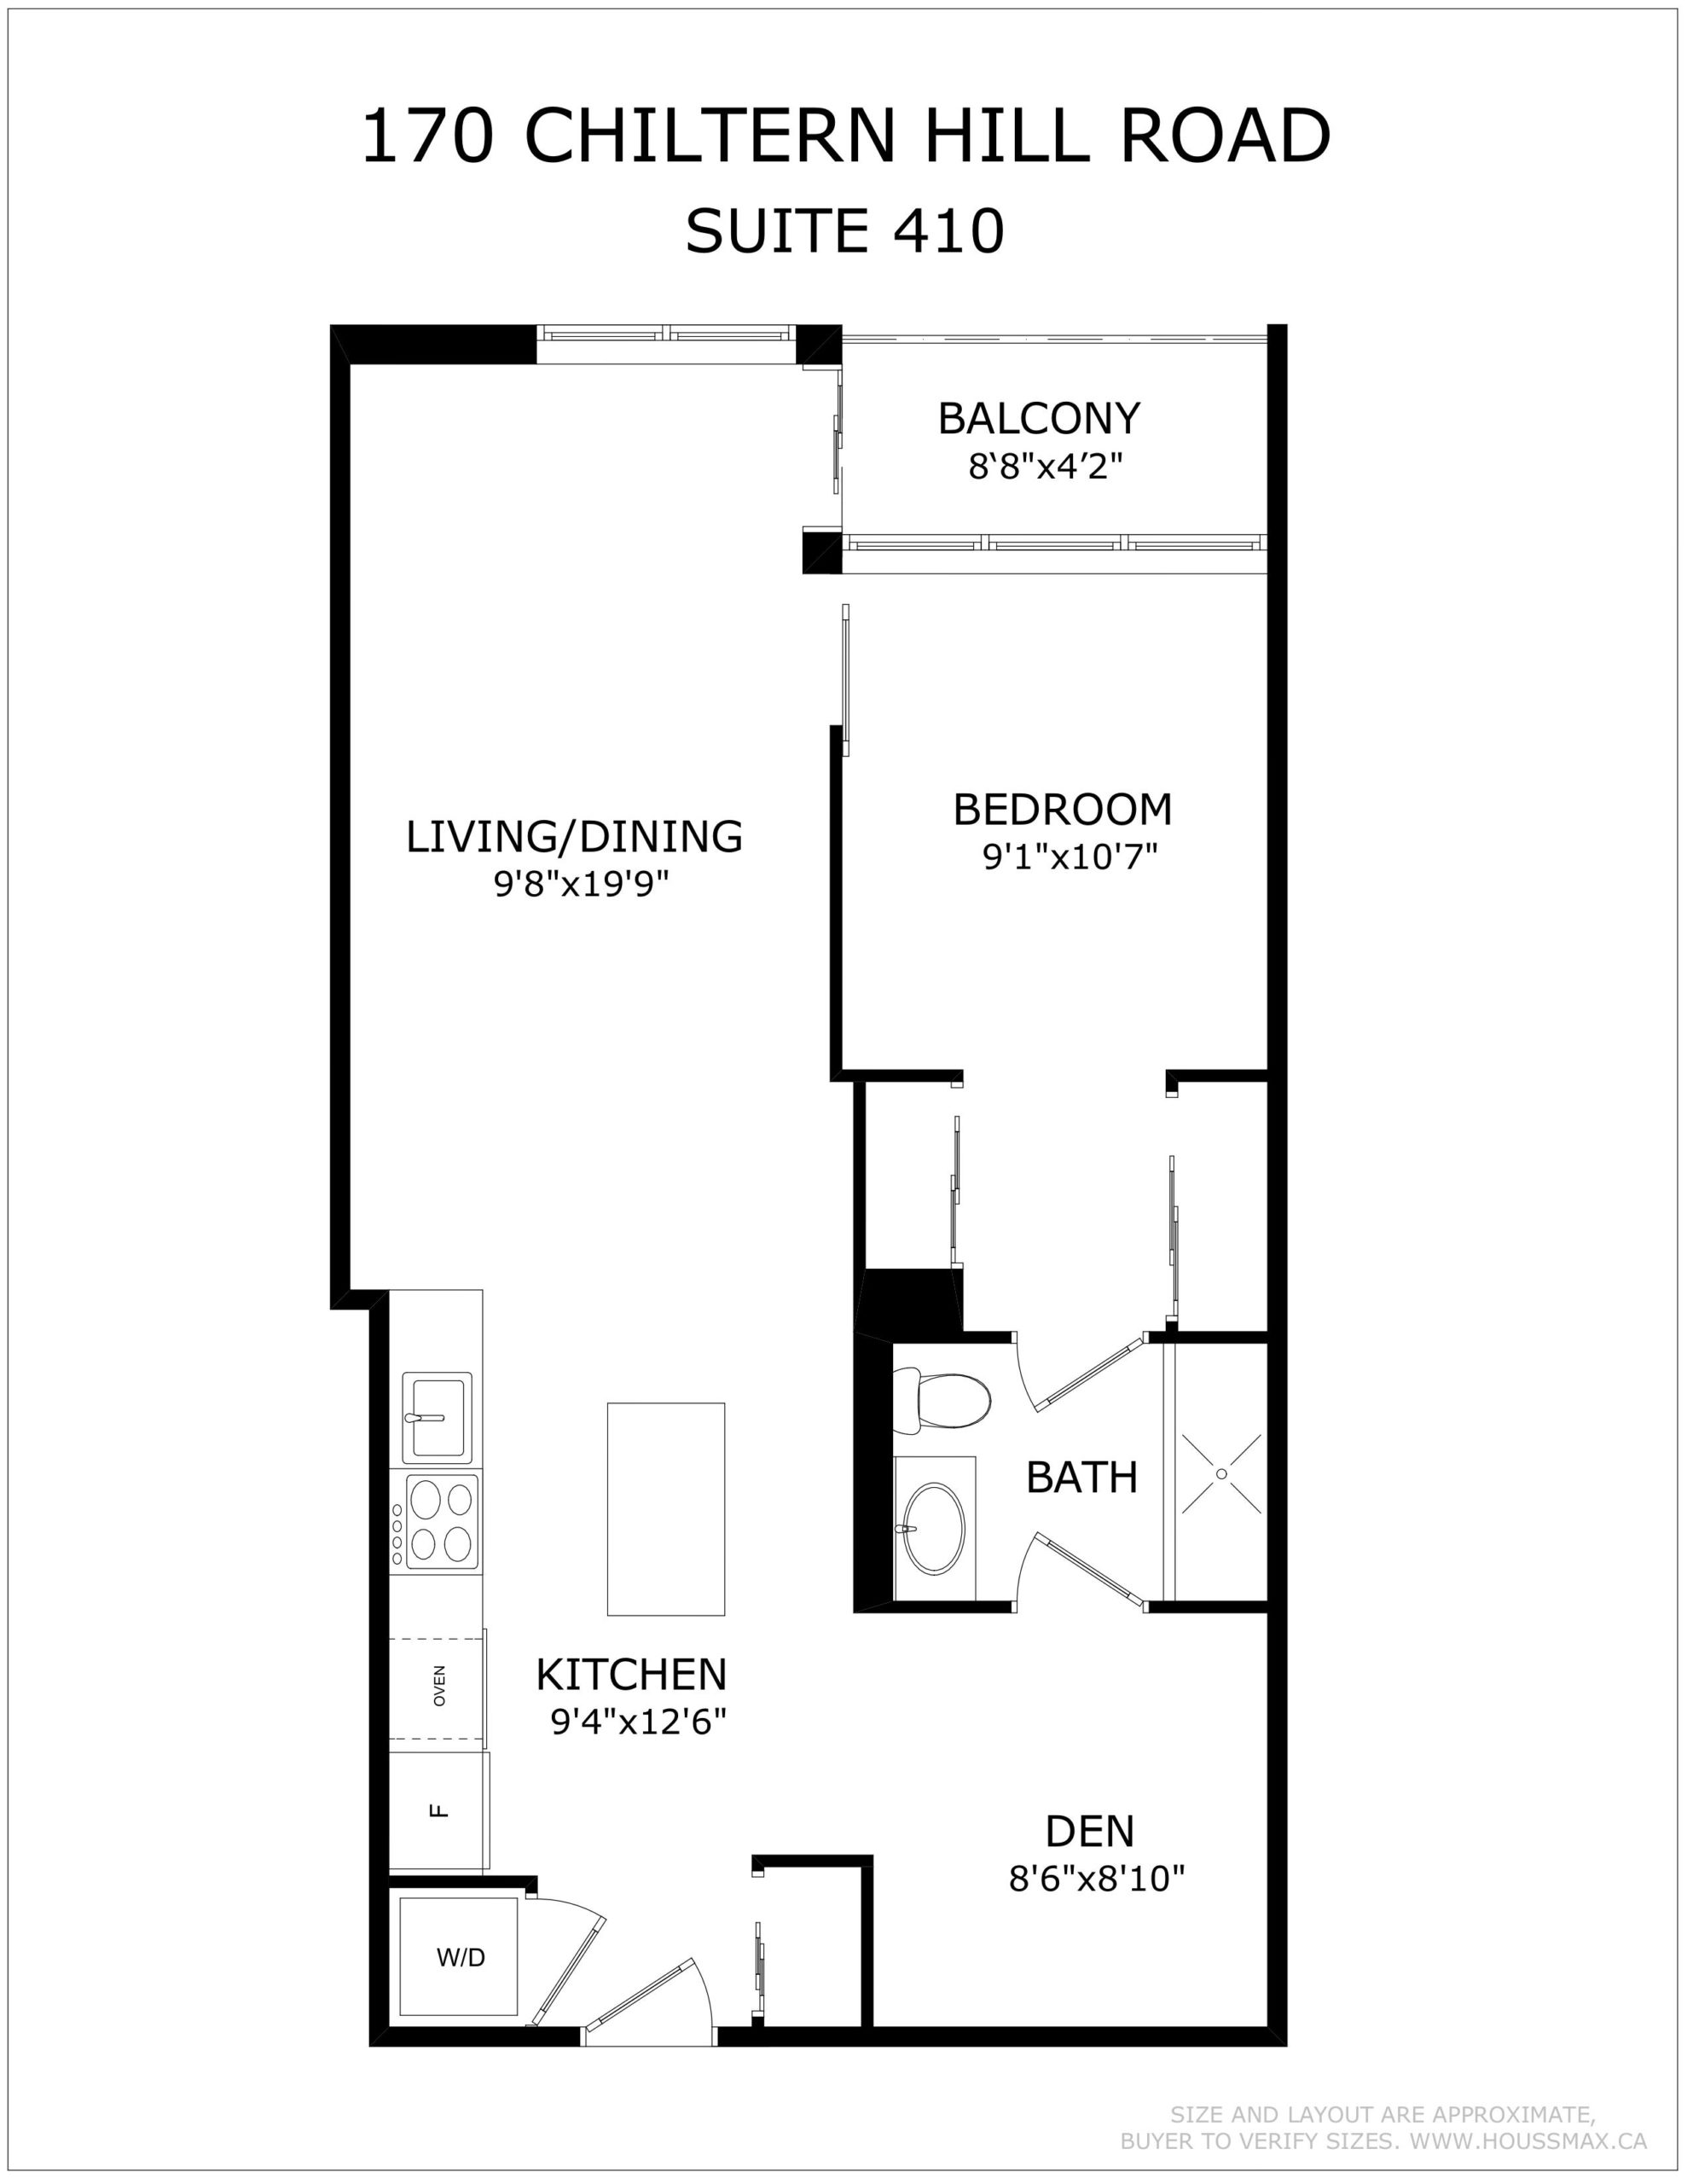 Floor plans for 170 Chiltern Hill Rd Unit 410.